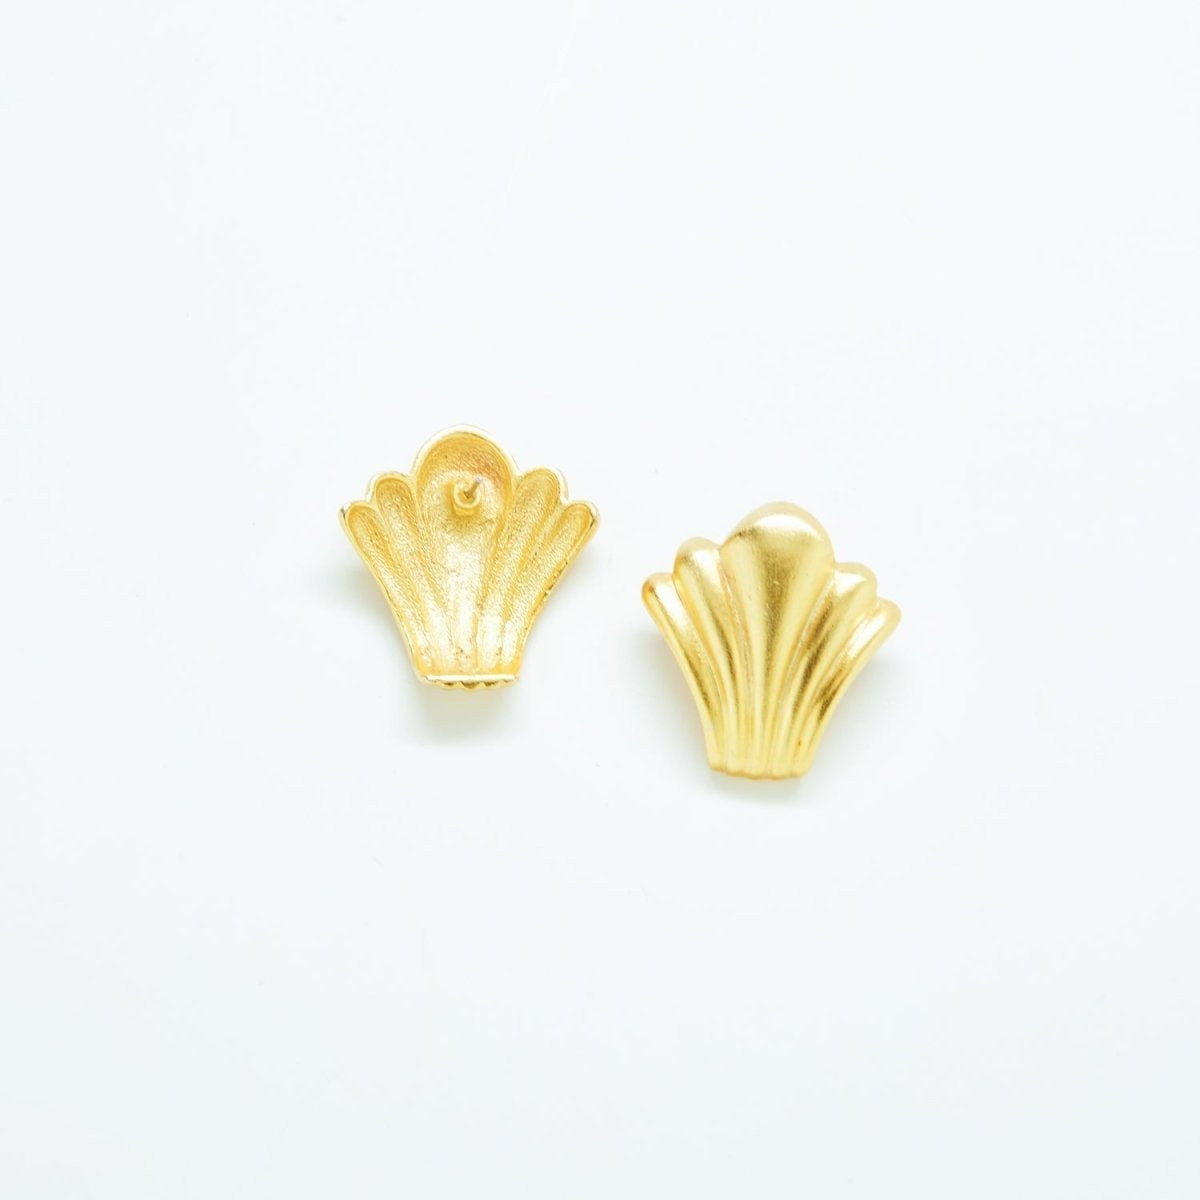 Vintage Gold Shell Earrings - Admiral Row